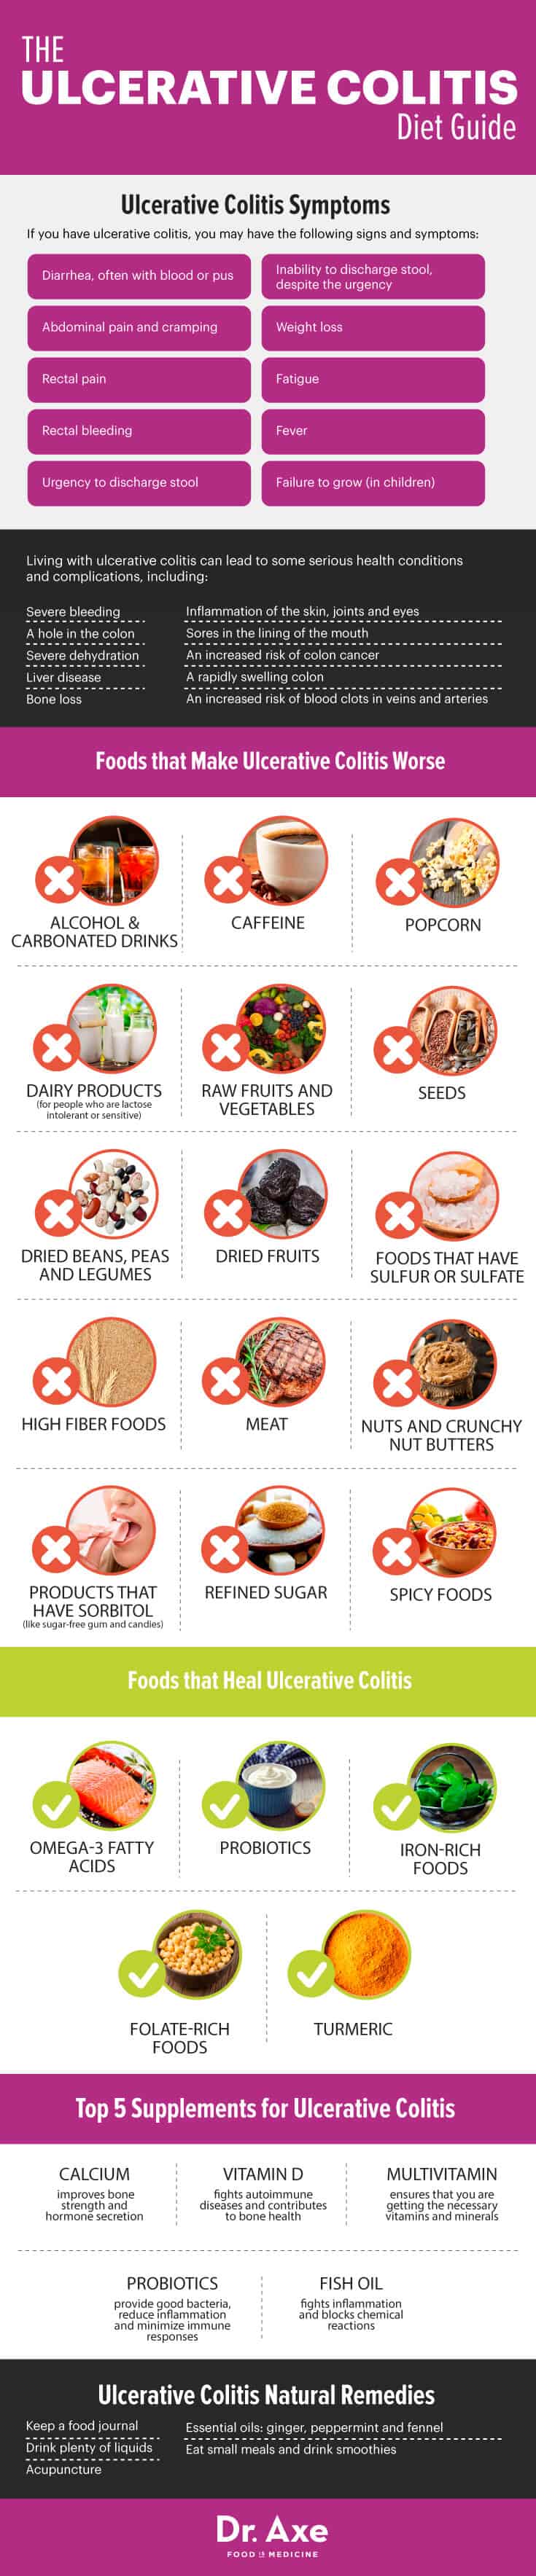 Ulcerative colitis diet manual - Dr. Axe